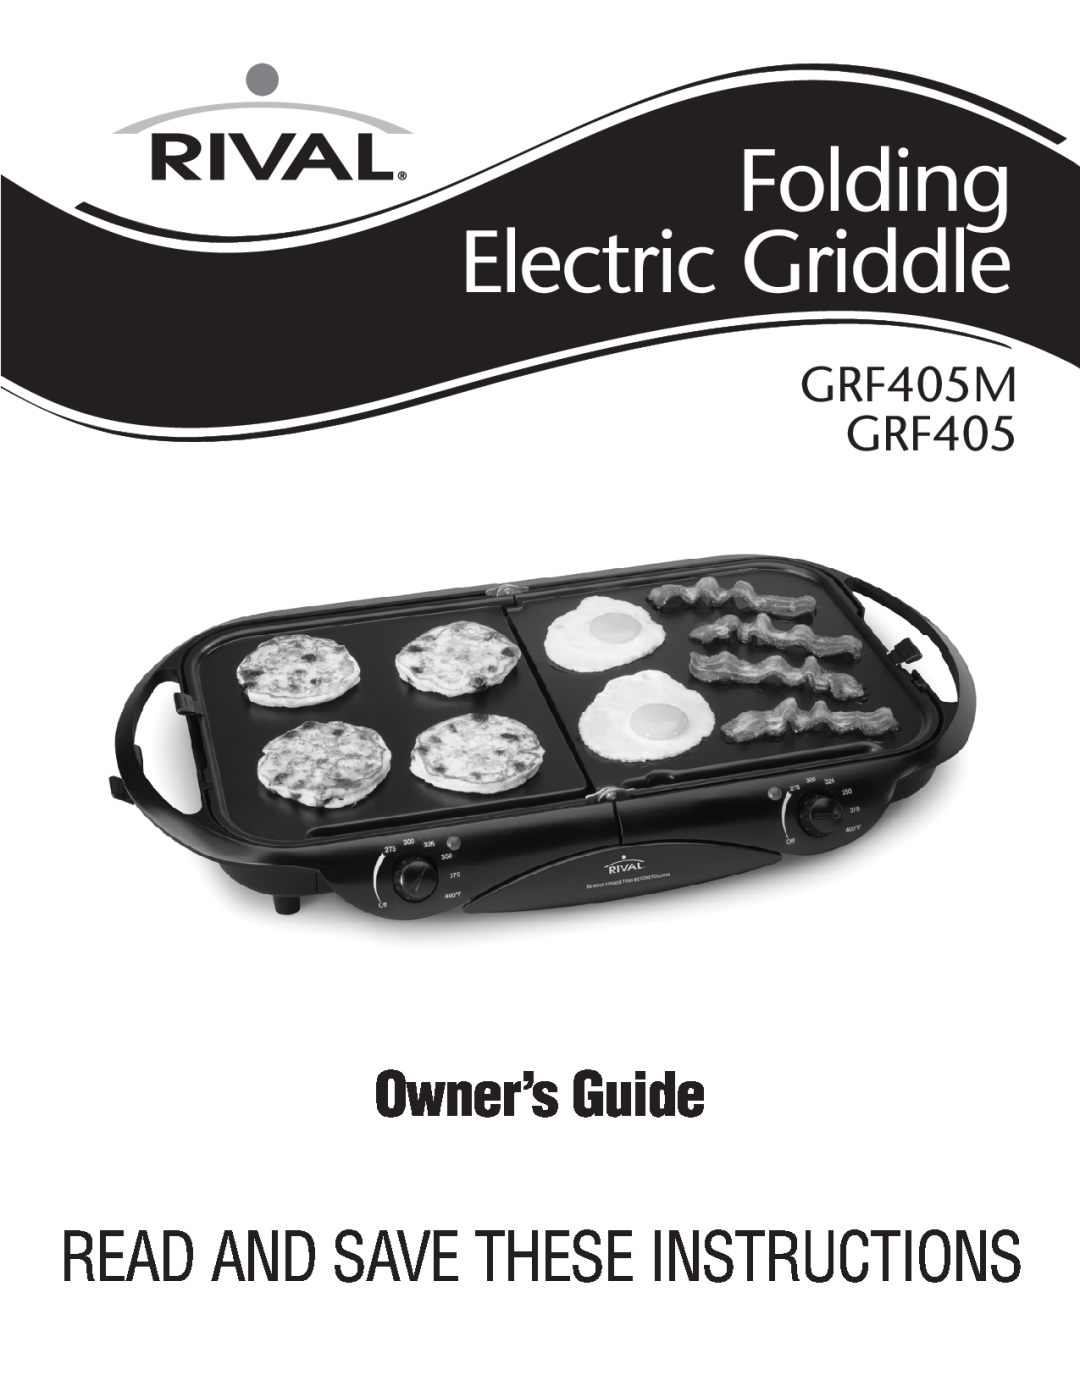 Rival manual Owner’sGuide, GRF405M GRF405, Folding ElectricGriddle, Read And Savethese Instructions 